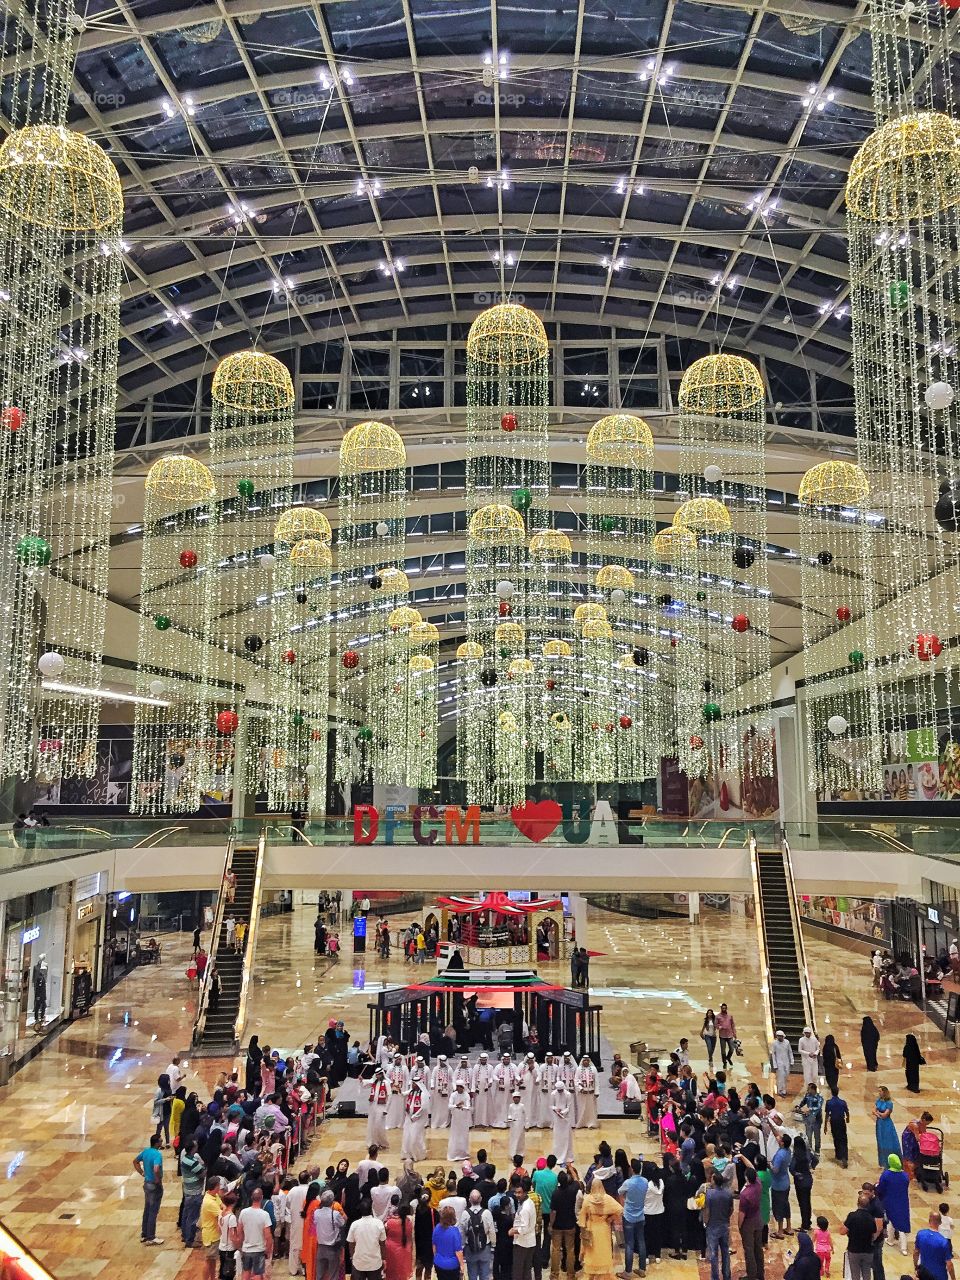 Festive decoration of lights in mall